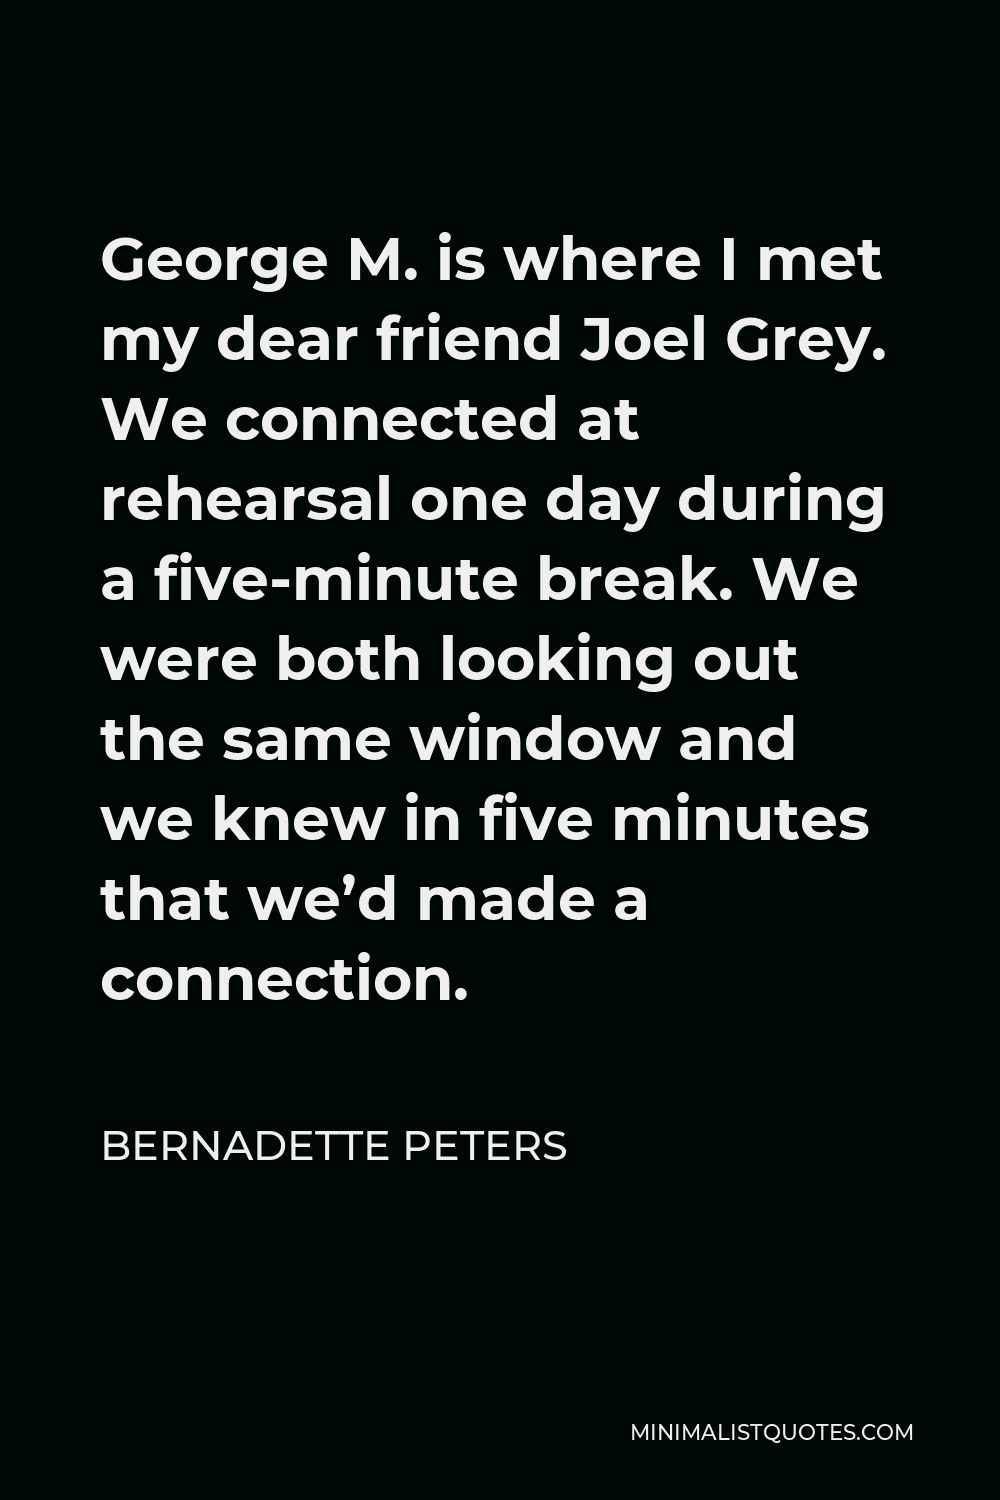 Bernadette Peters Quote - George M. is where I met my dear friend Joel Grey. We connected at rehearsal one day during a five-minute break. We were both looking out the same window and we knew in five minutes that we’d made a connection.